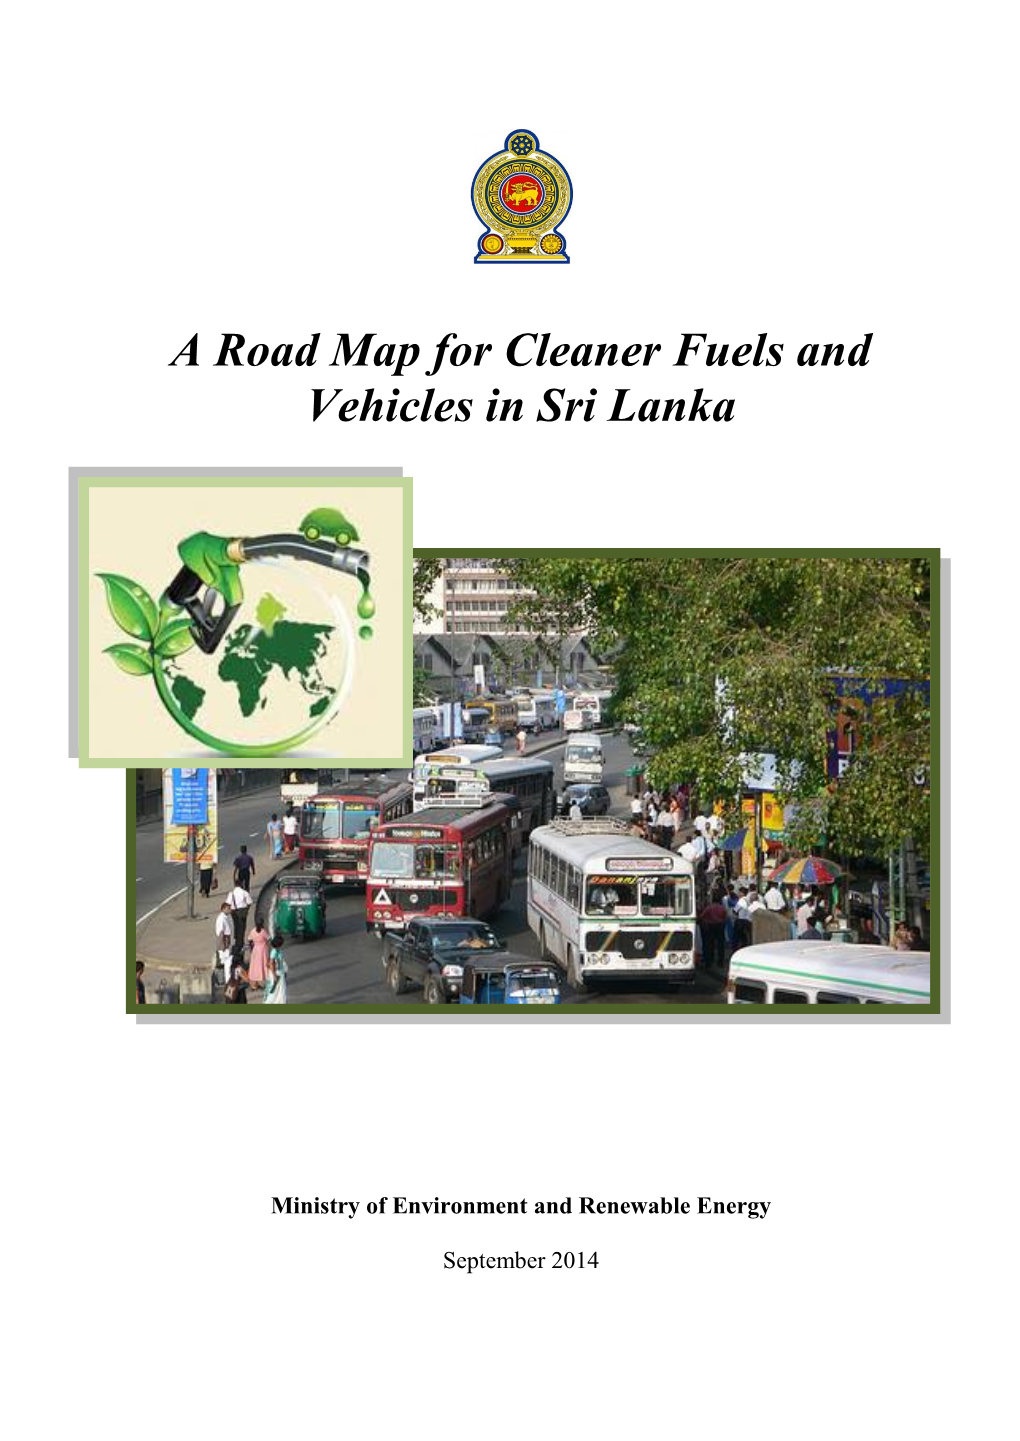 A Road Map for Cleaner Fuels and Vehicles in Sri Lanka